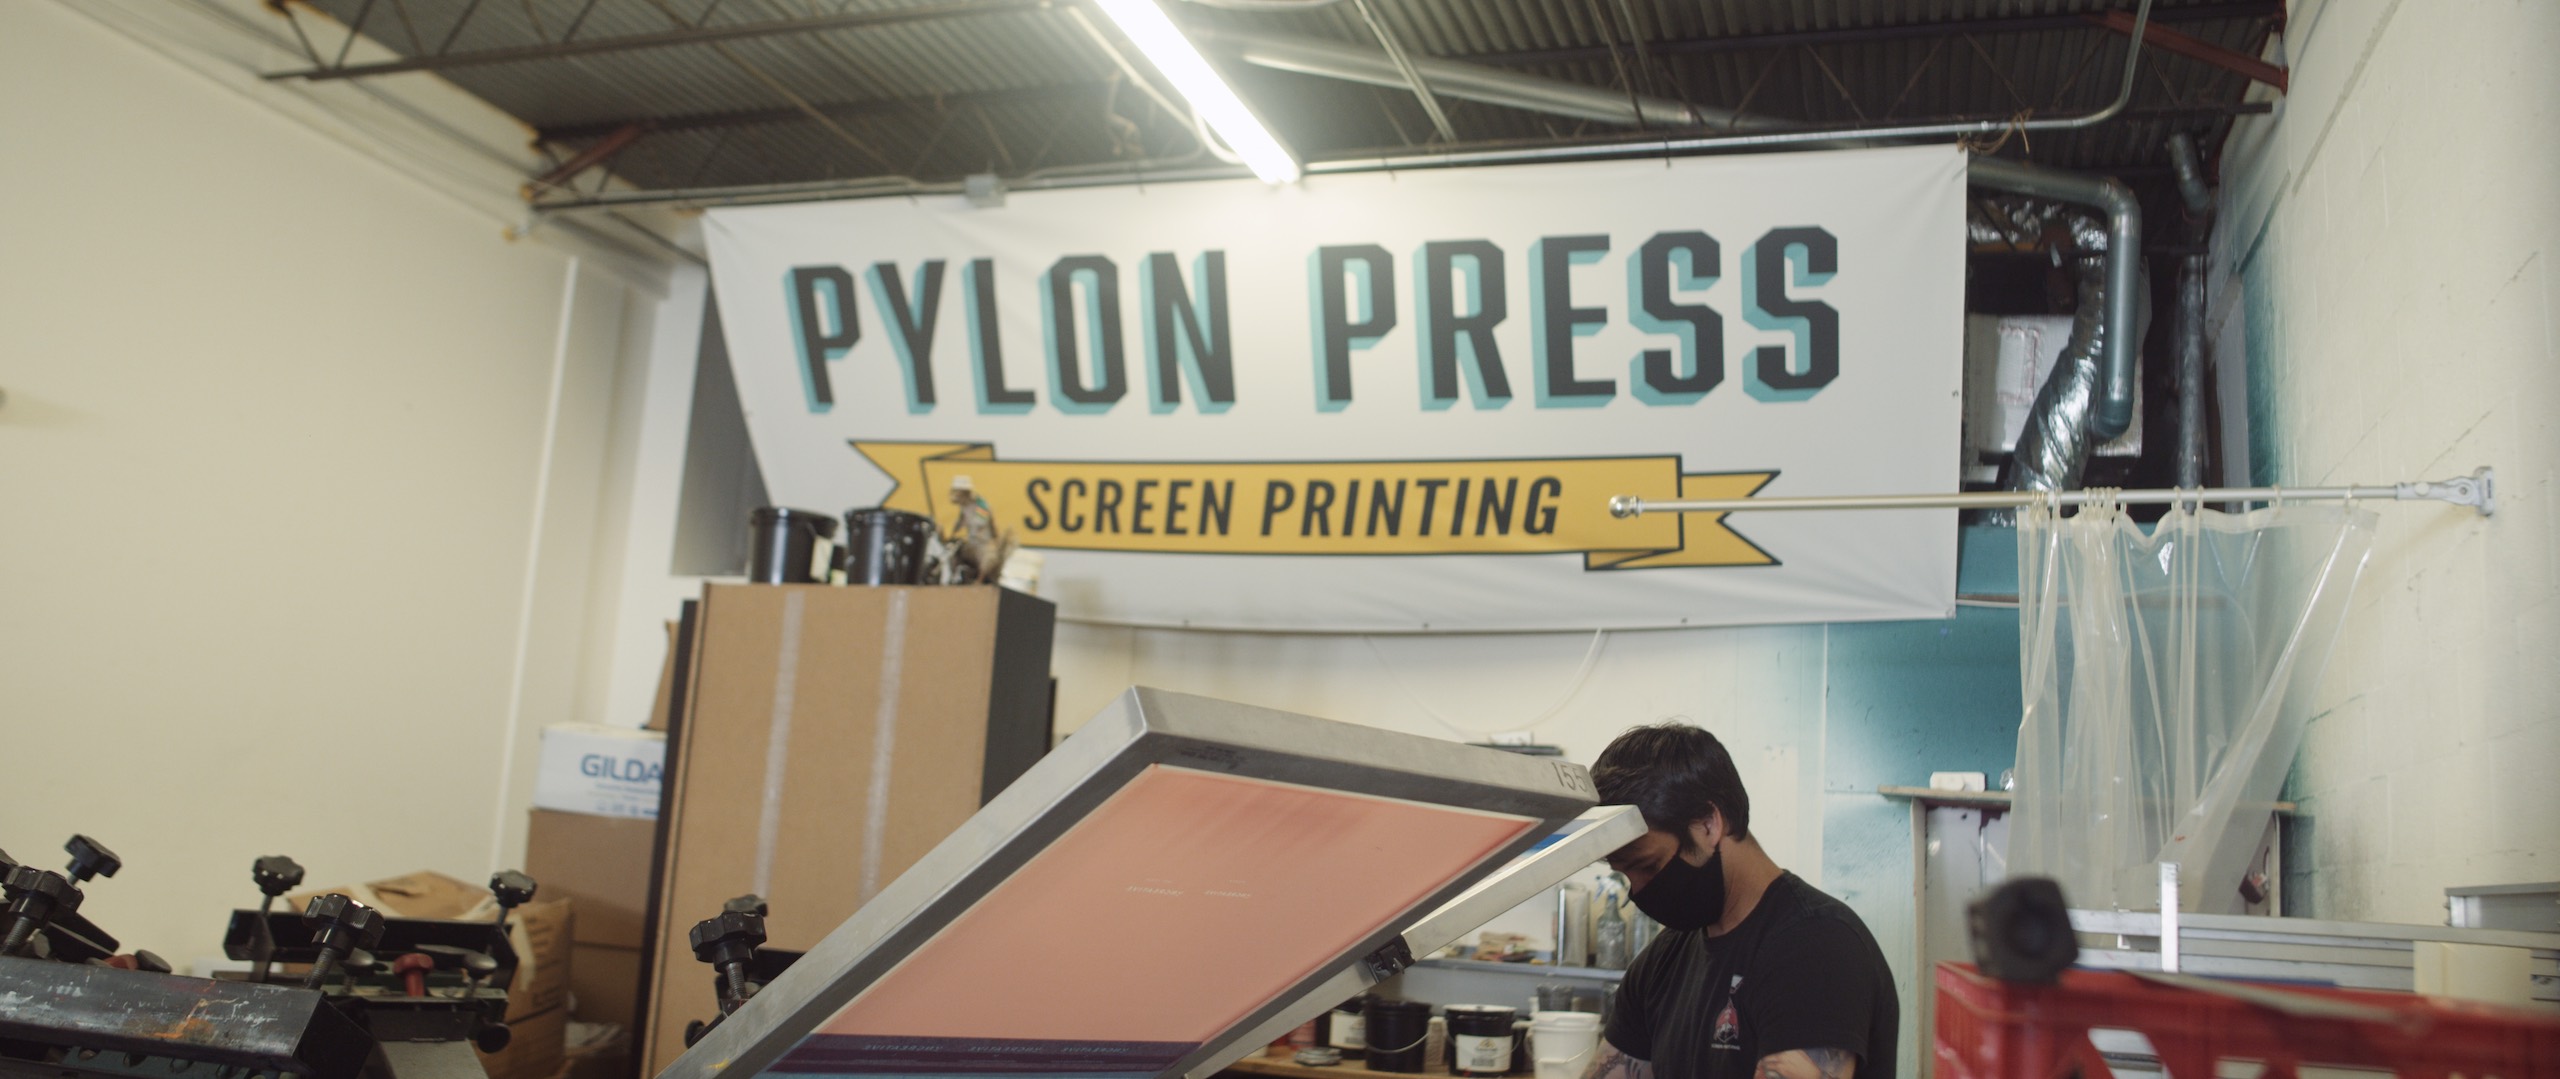 The Dailies Episode 4 the Making of Uncreative Shop and Merchandise with man wearing a black mask working with equipment in Pylon Press Screen Printing Shop